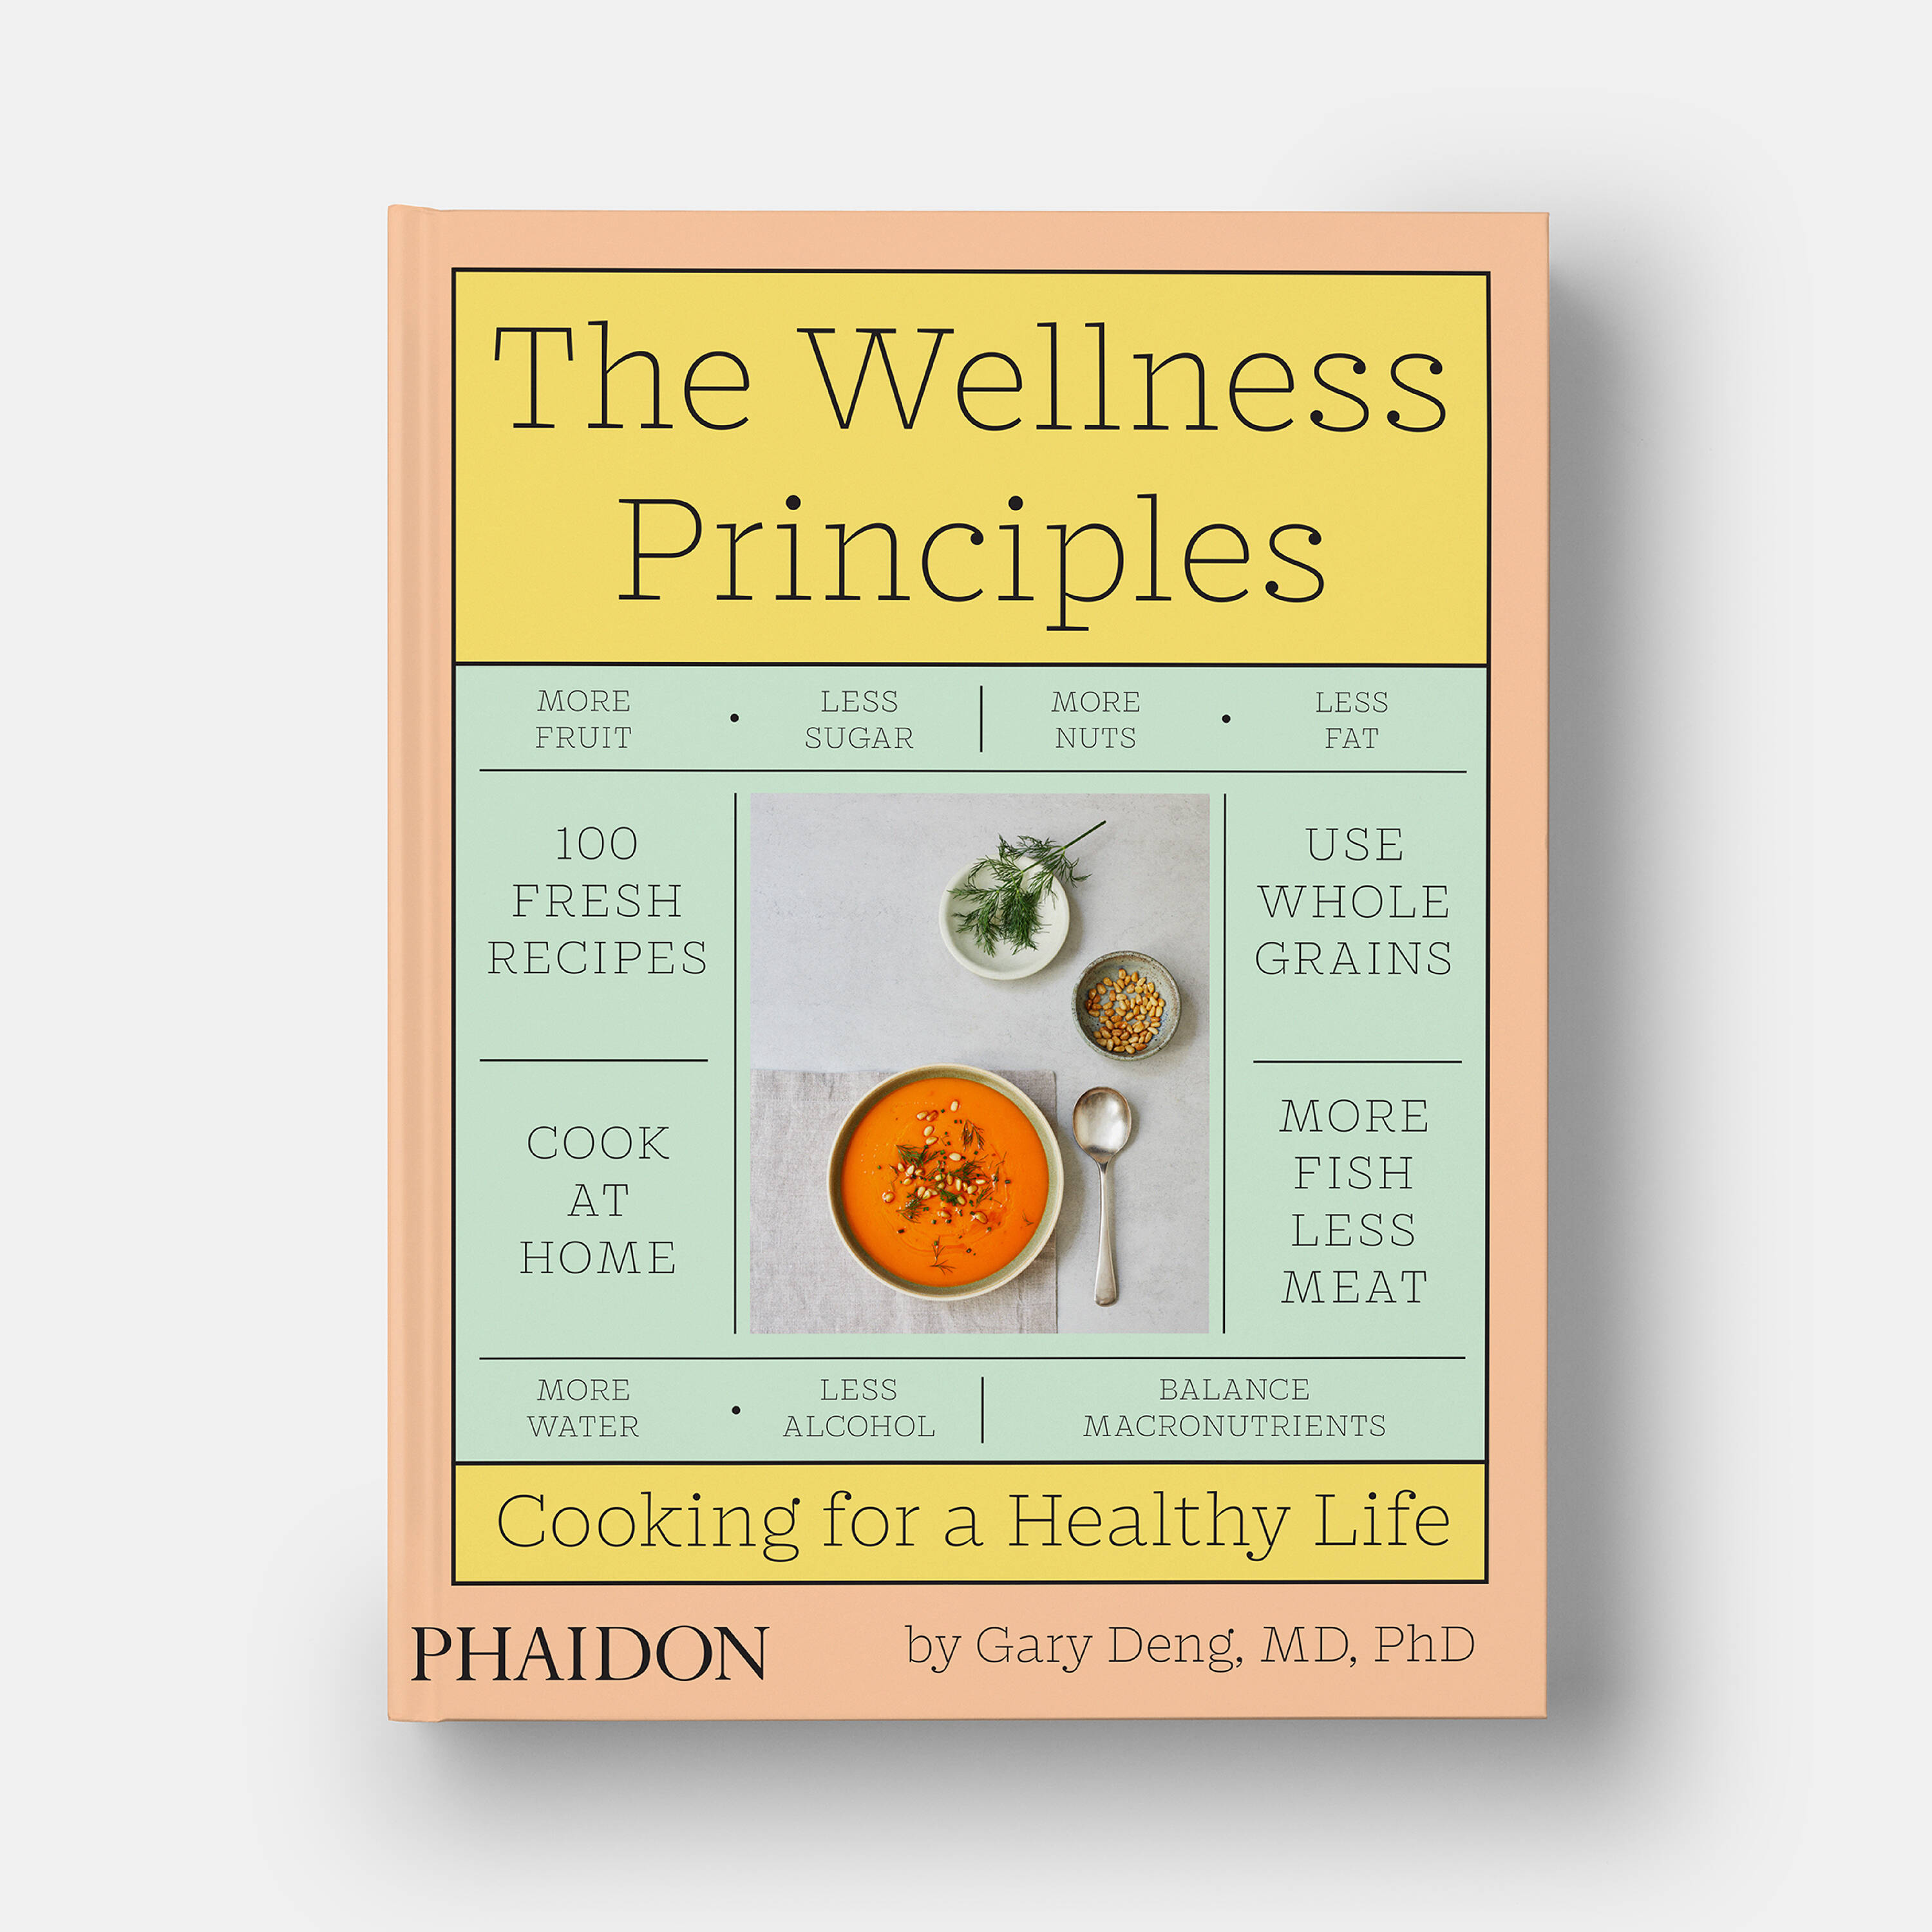 Try these Three Wellness Principles next time you go food shopping